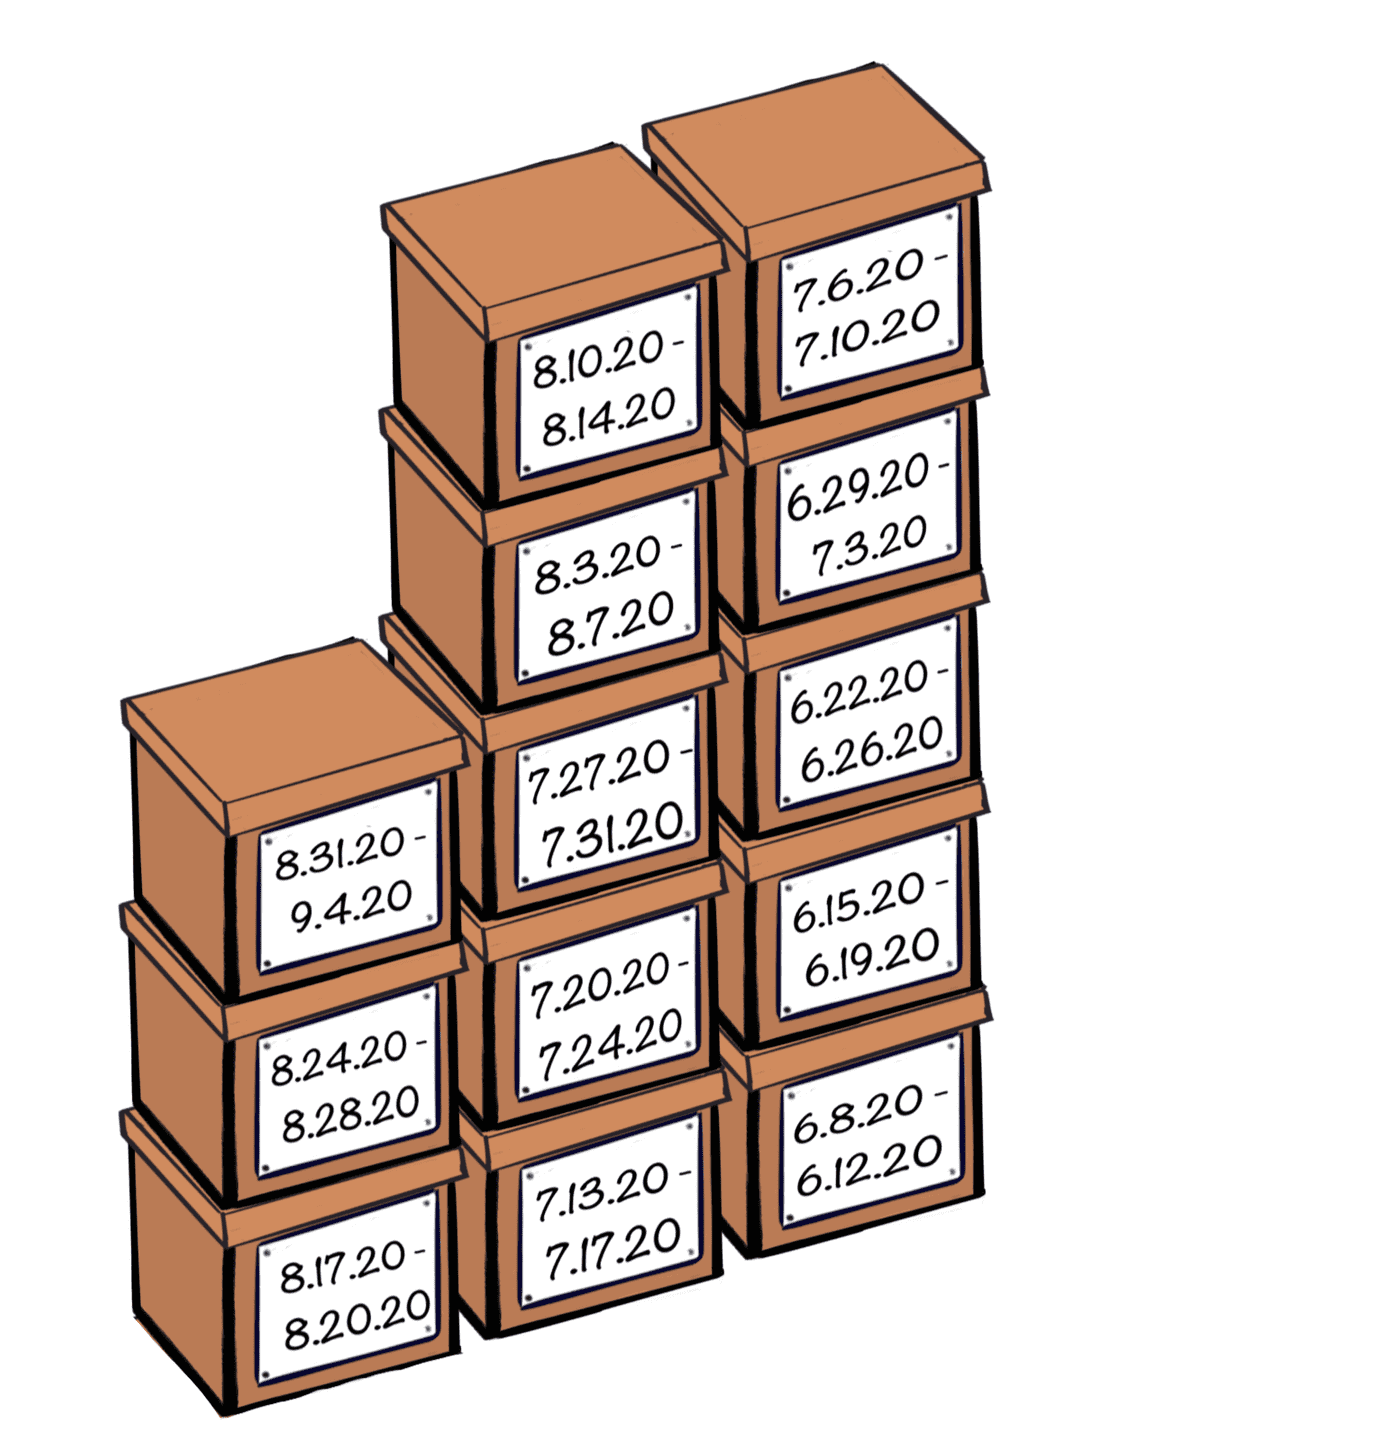 three stacks of cardboard boxes, each labeled with a range of dates